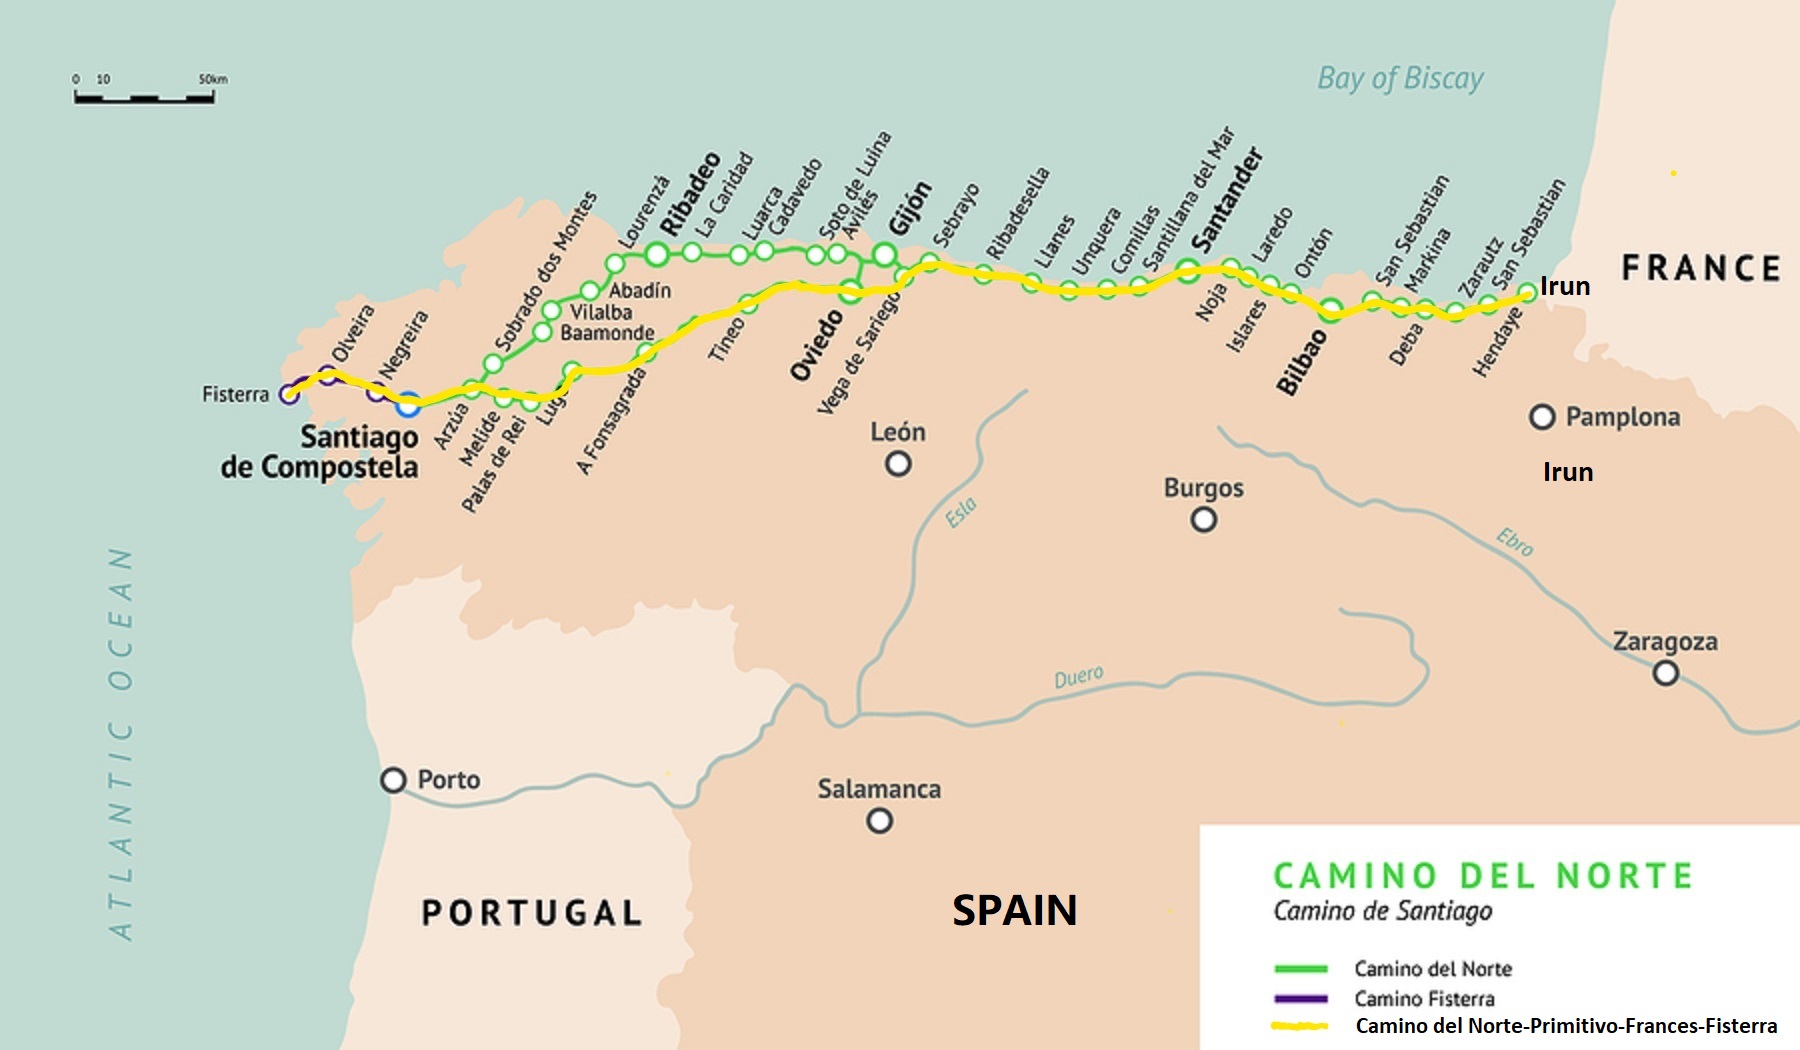 My Camino de Santiago is show in yellow on this map. It encompassed the Del Norte, Primitivo, Frances, and Fisterra routes.